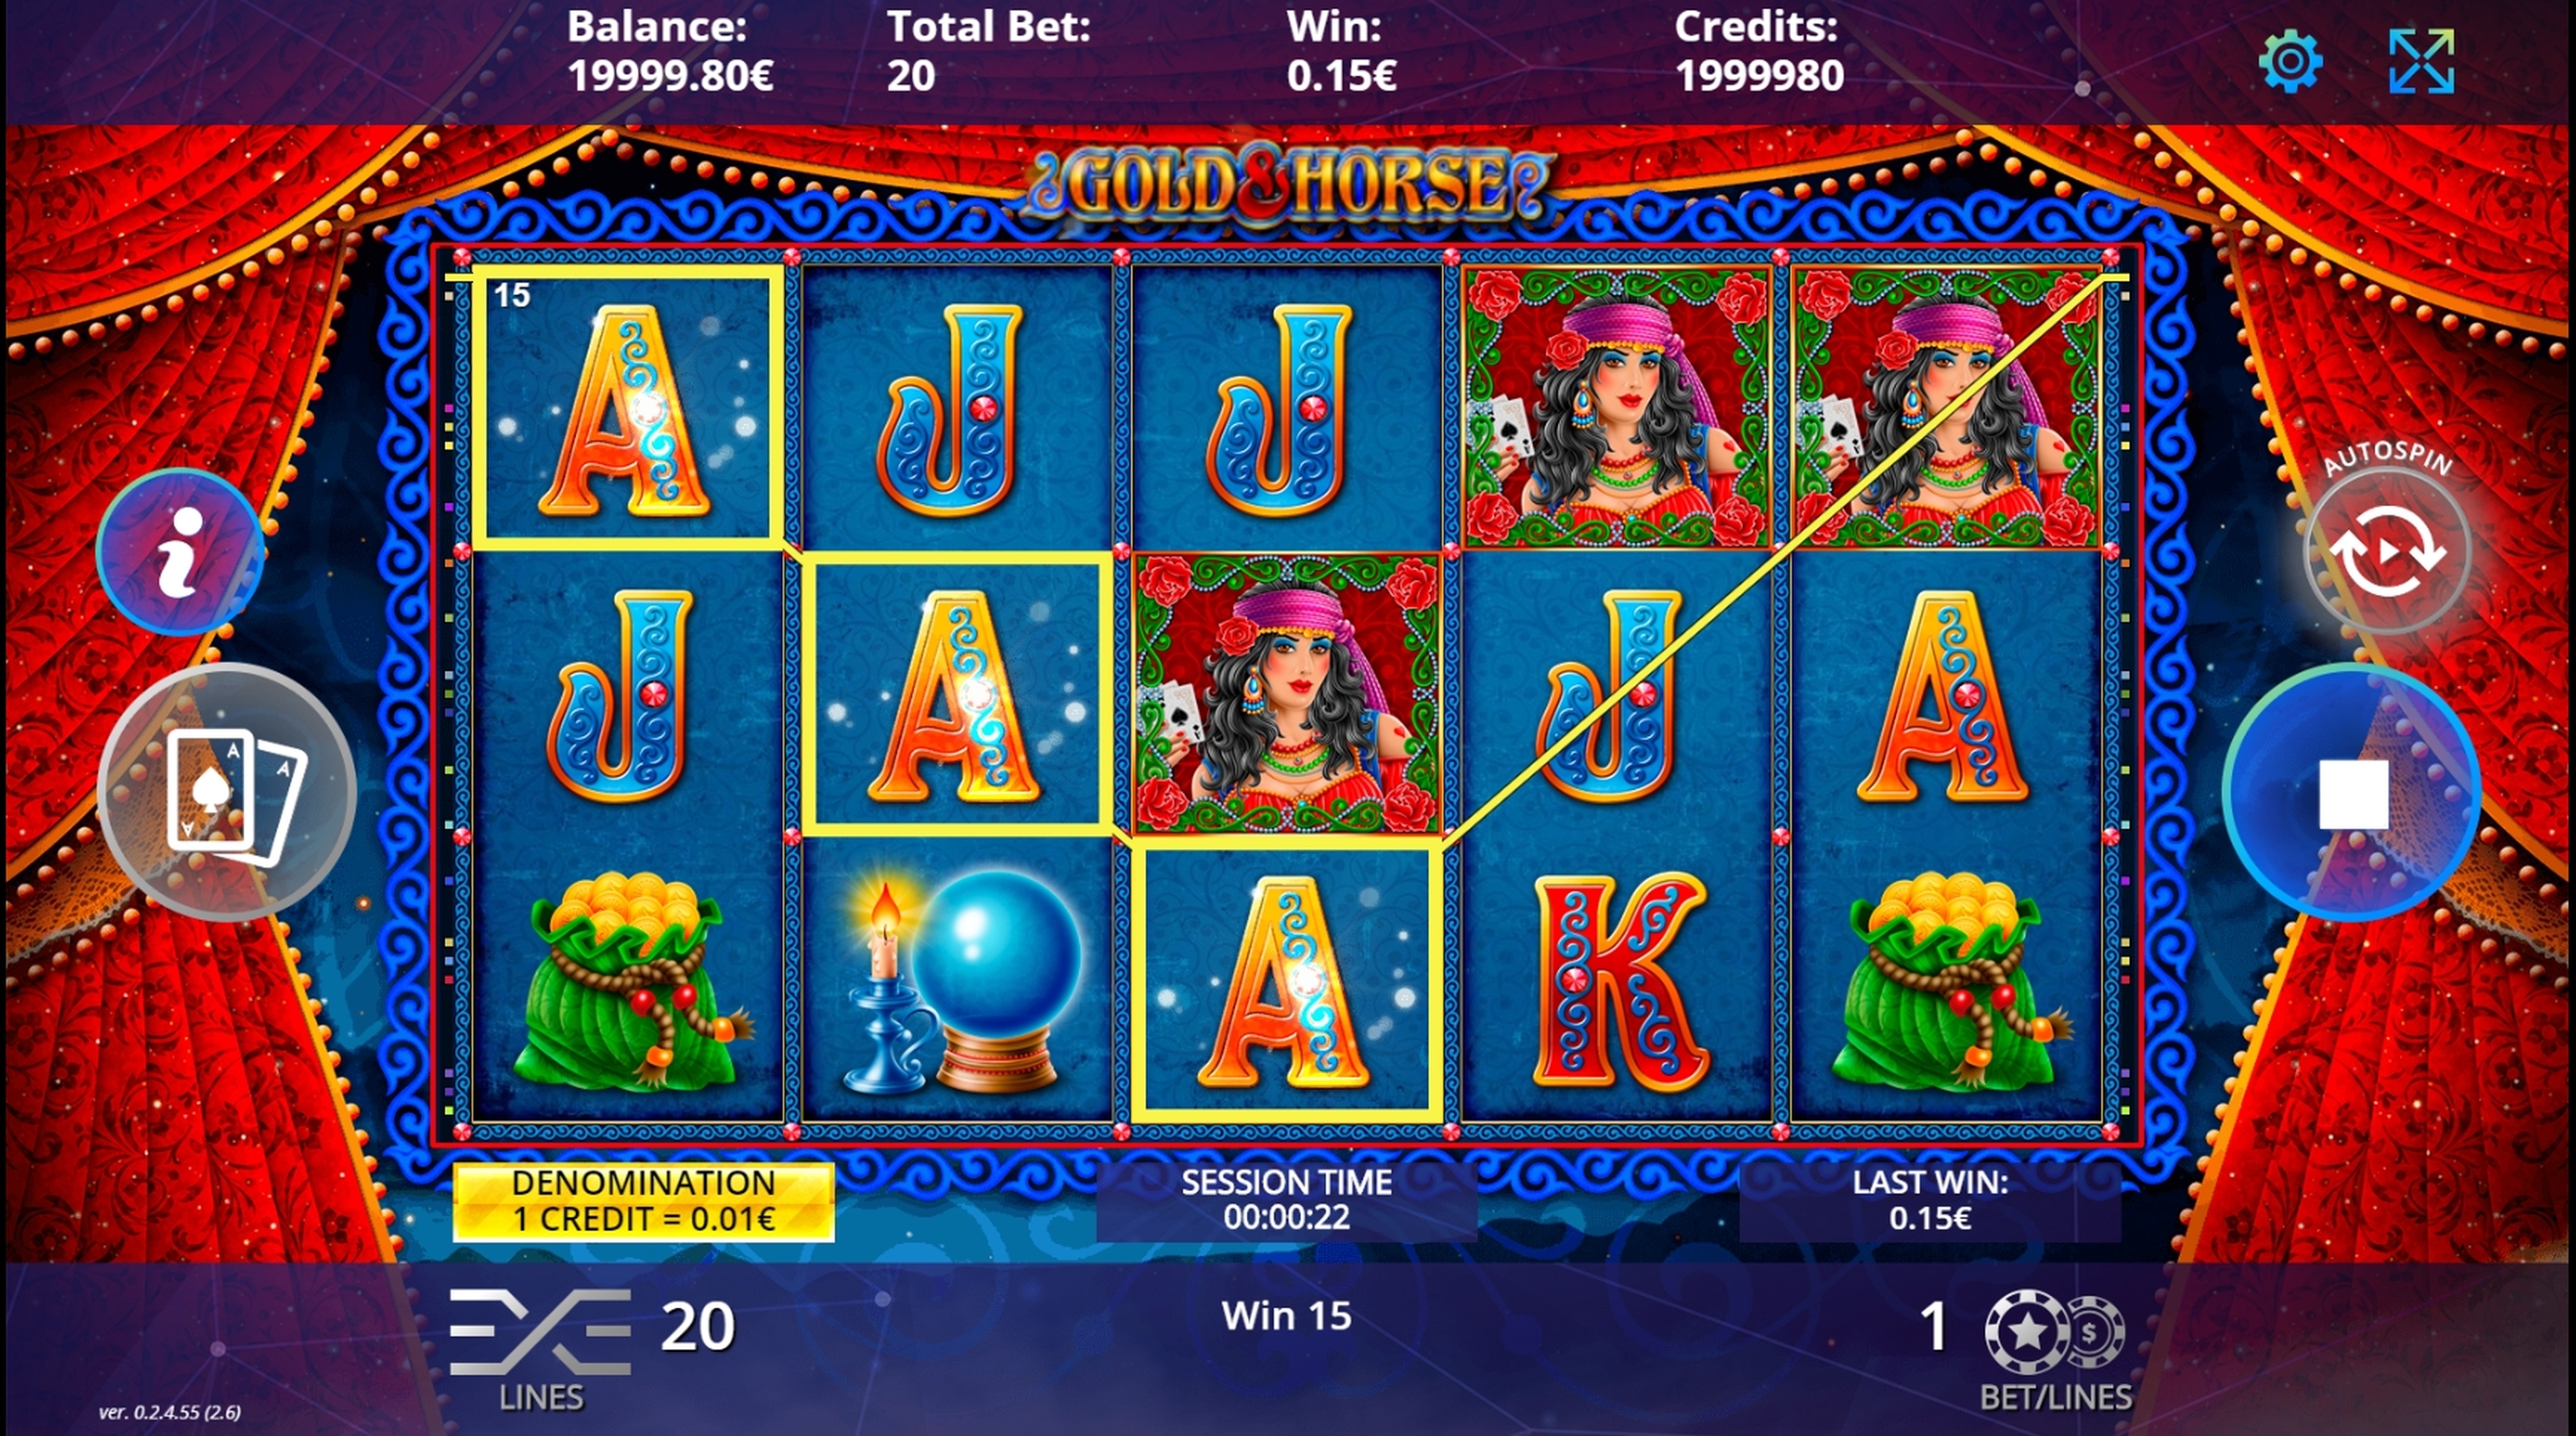 Win Money in Gold & Horse Free Slot Game by DLV